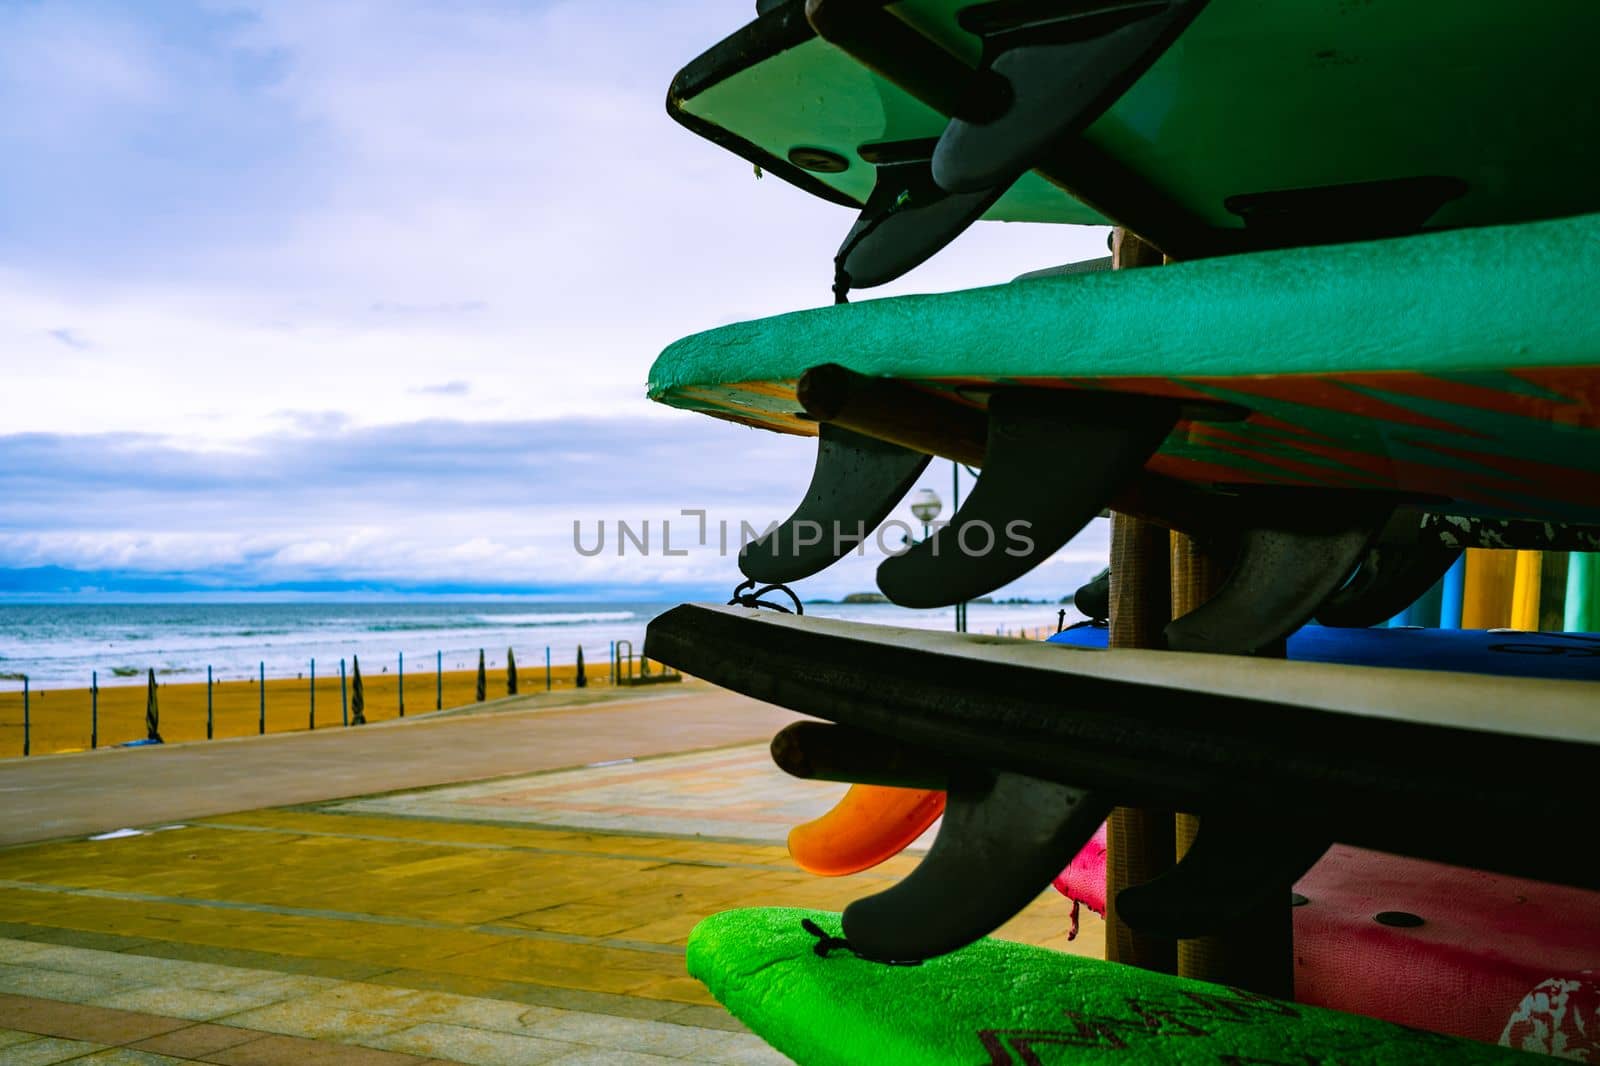 Surfboards on the background of the Atlantic coast of Spain. Surfboard rental